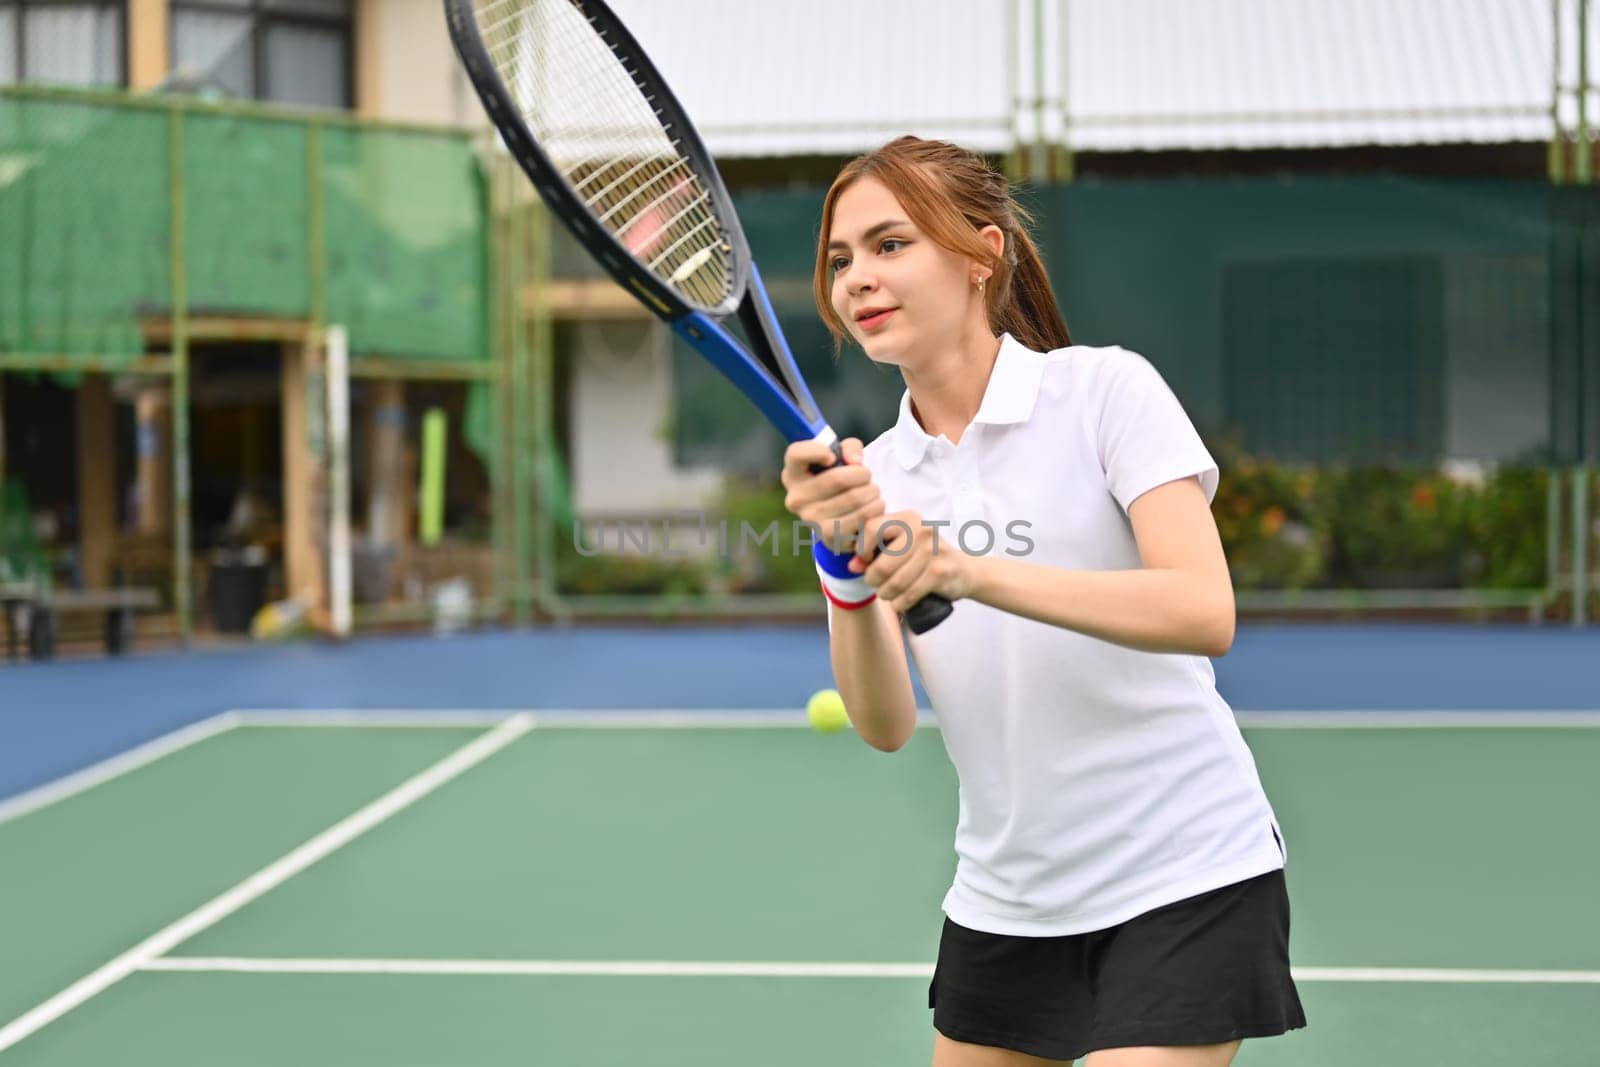 Joyful young woman hitting ball with racket to return ball over net. Sport, fitness, training and active life concept.